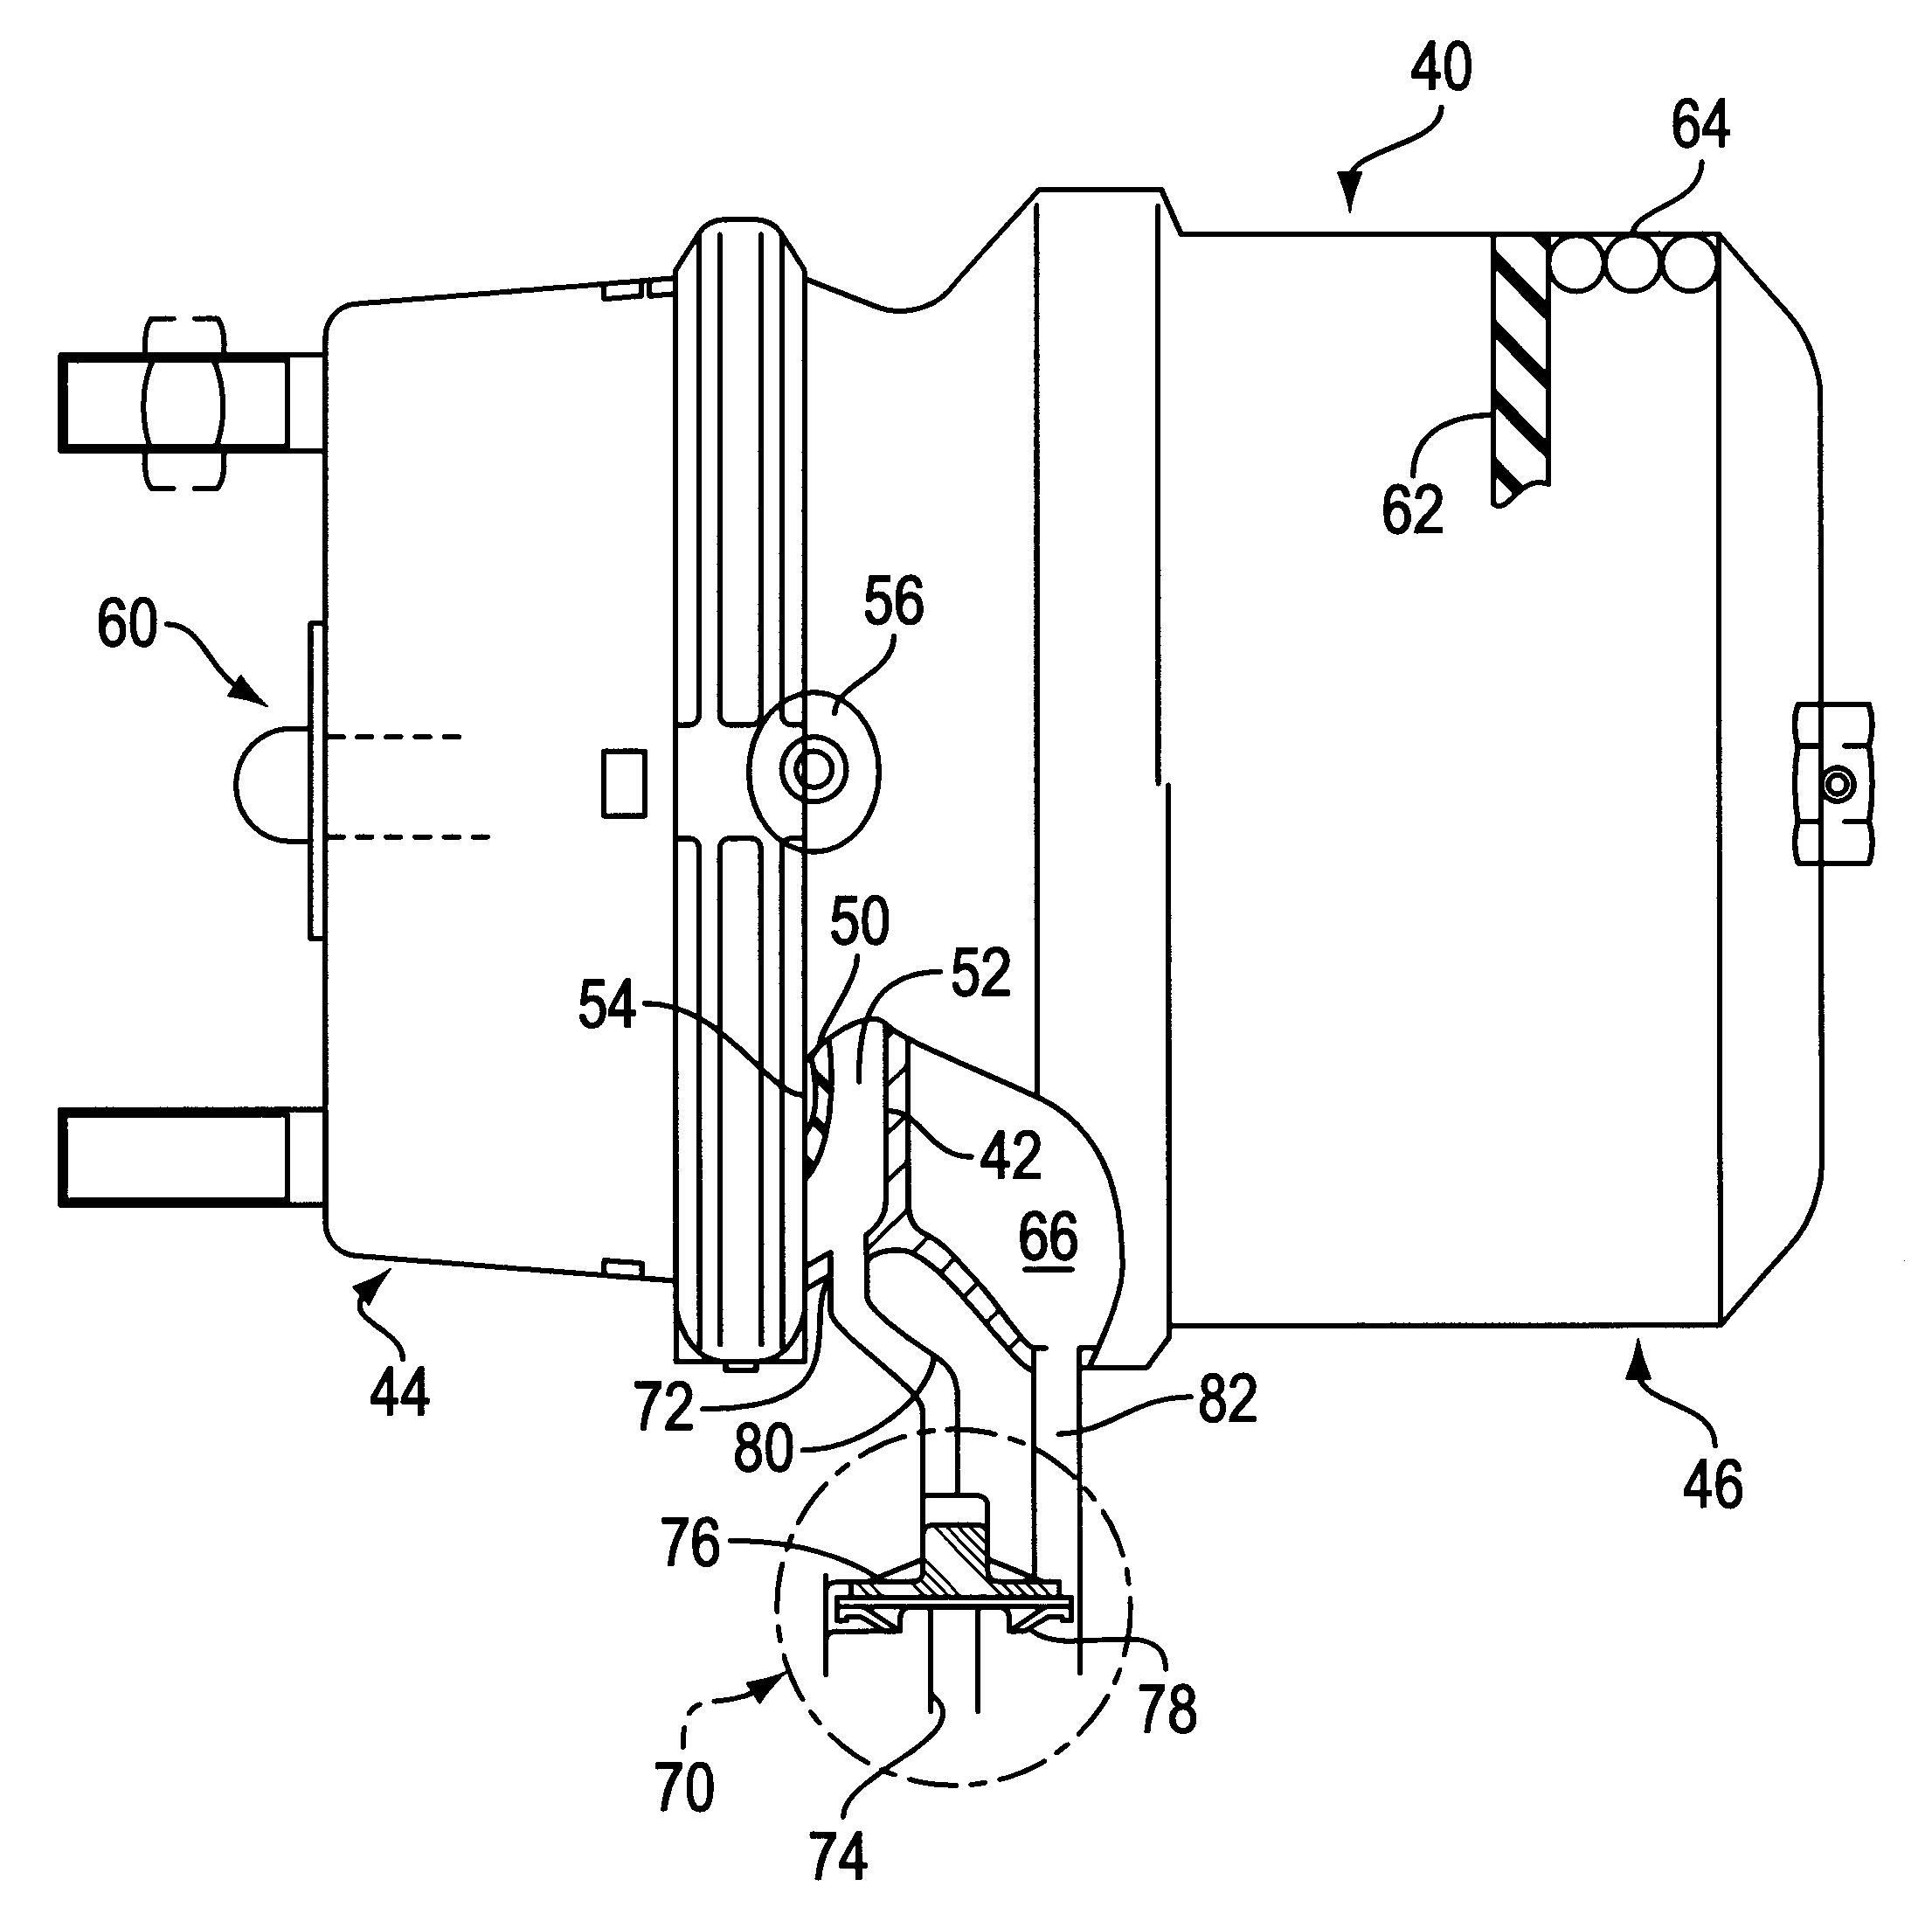 Spring brake actuator with integral biased double check valve for anti-compounding and roll-back protection